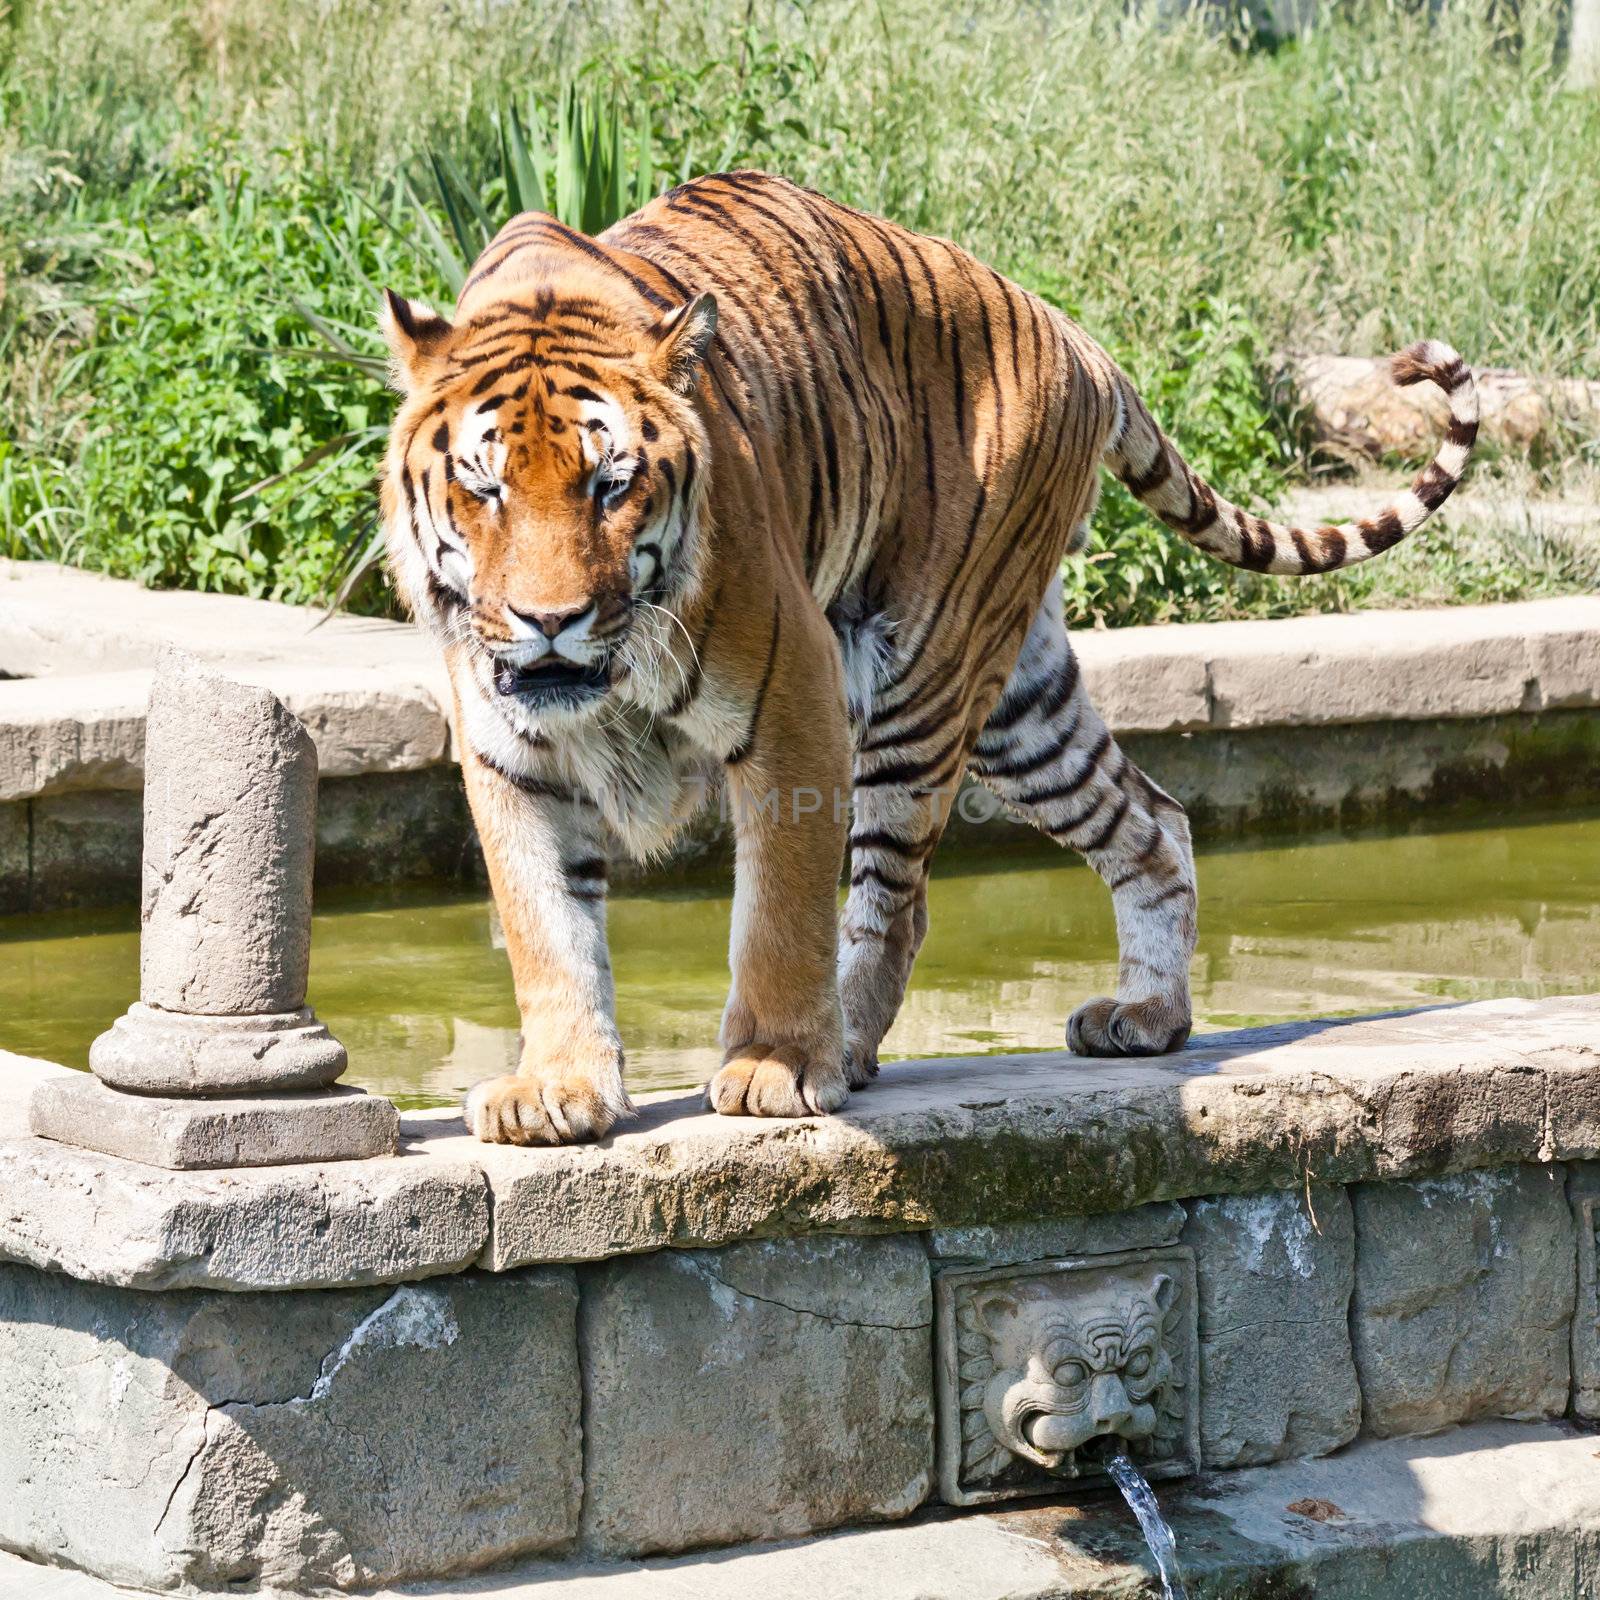 The tiger (Panthera tigris), a member of the Felidae family, is the largest of the four "big cats" in the genus Panthera. The tiger is native to much of eastern and southern Asia, and is an apex predator and an obligate carnivore.